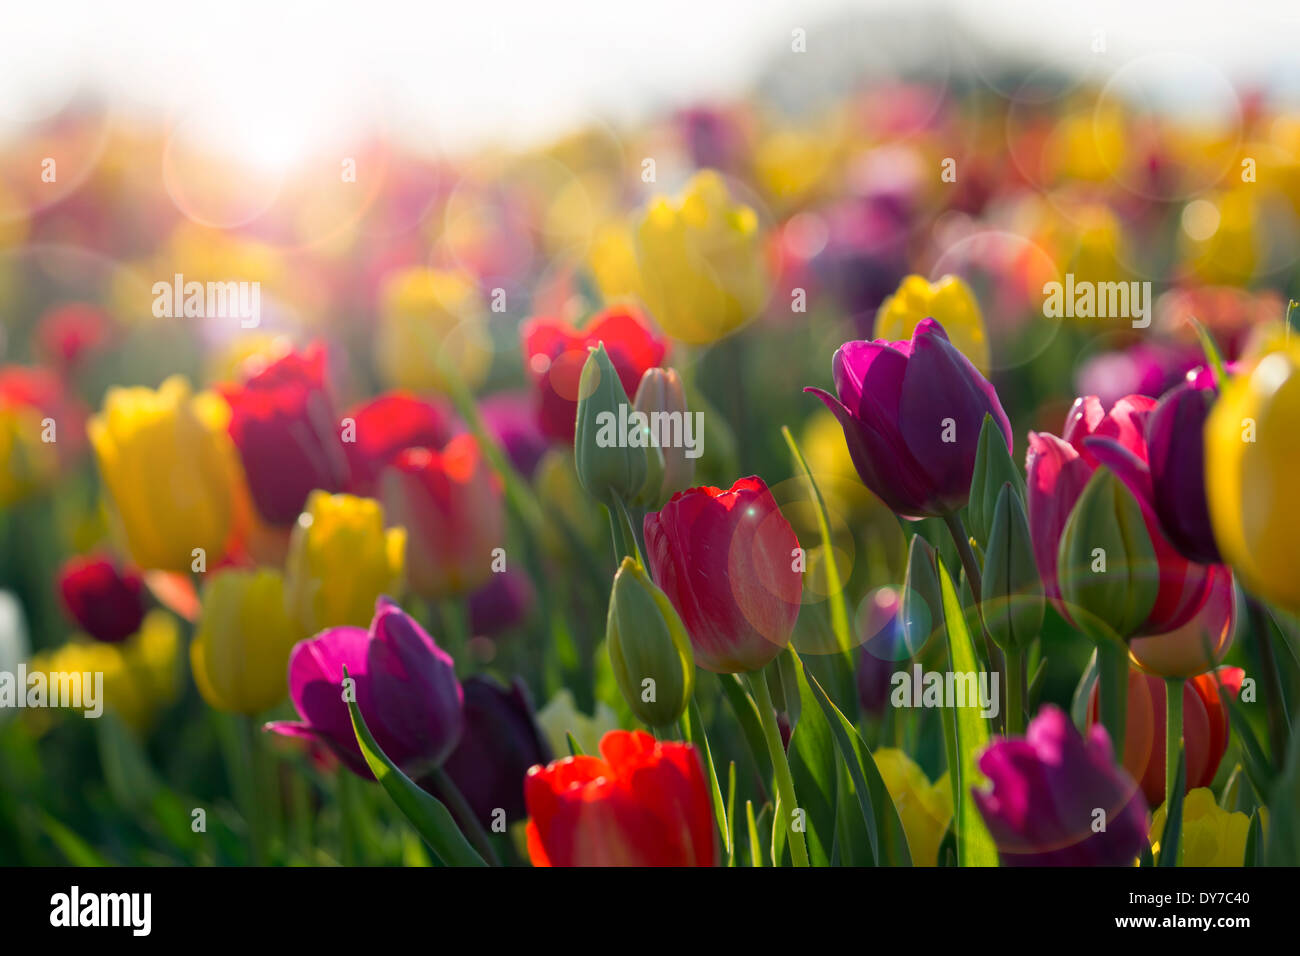 Field of Colorful Tulip Flowers in Bloom with Sun Flares and Bokeh Stock Photo